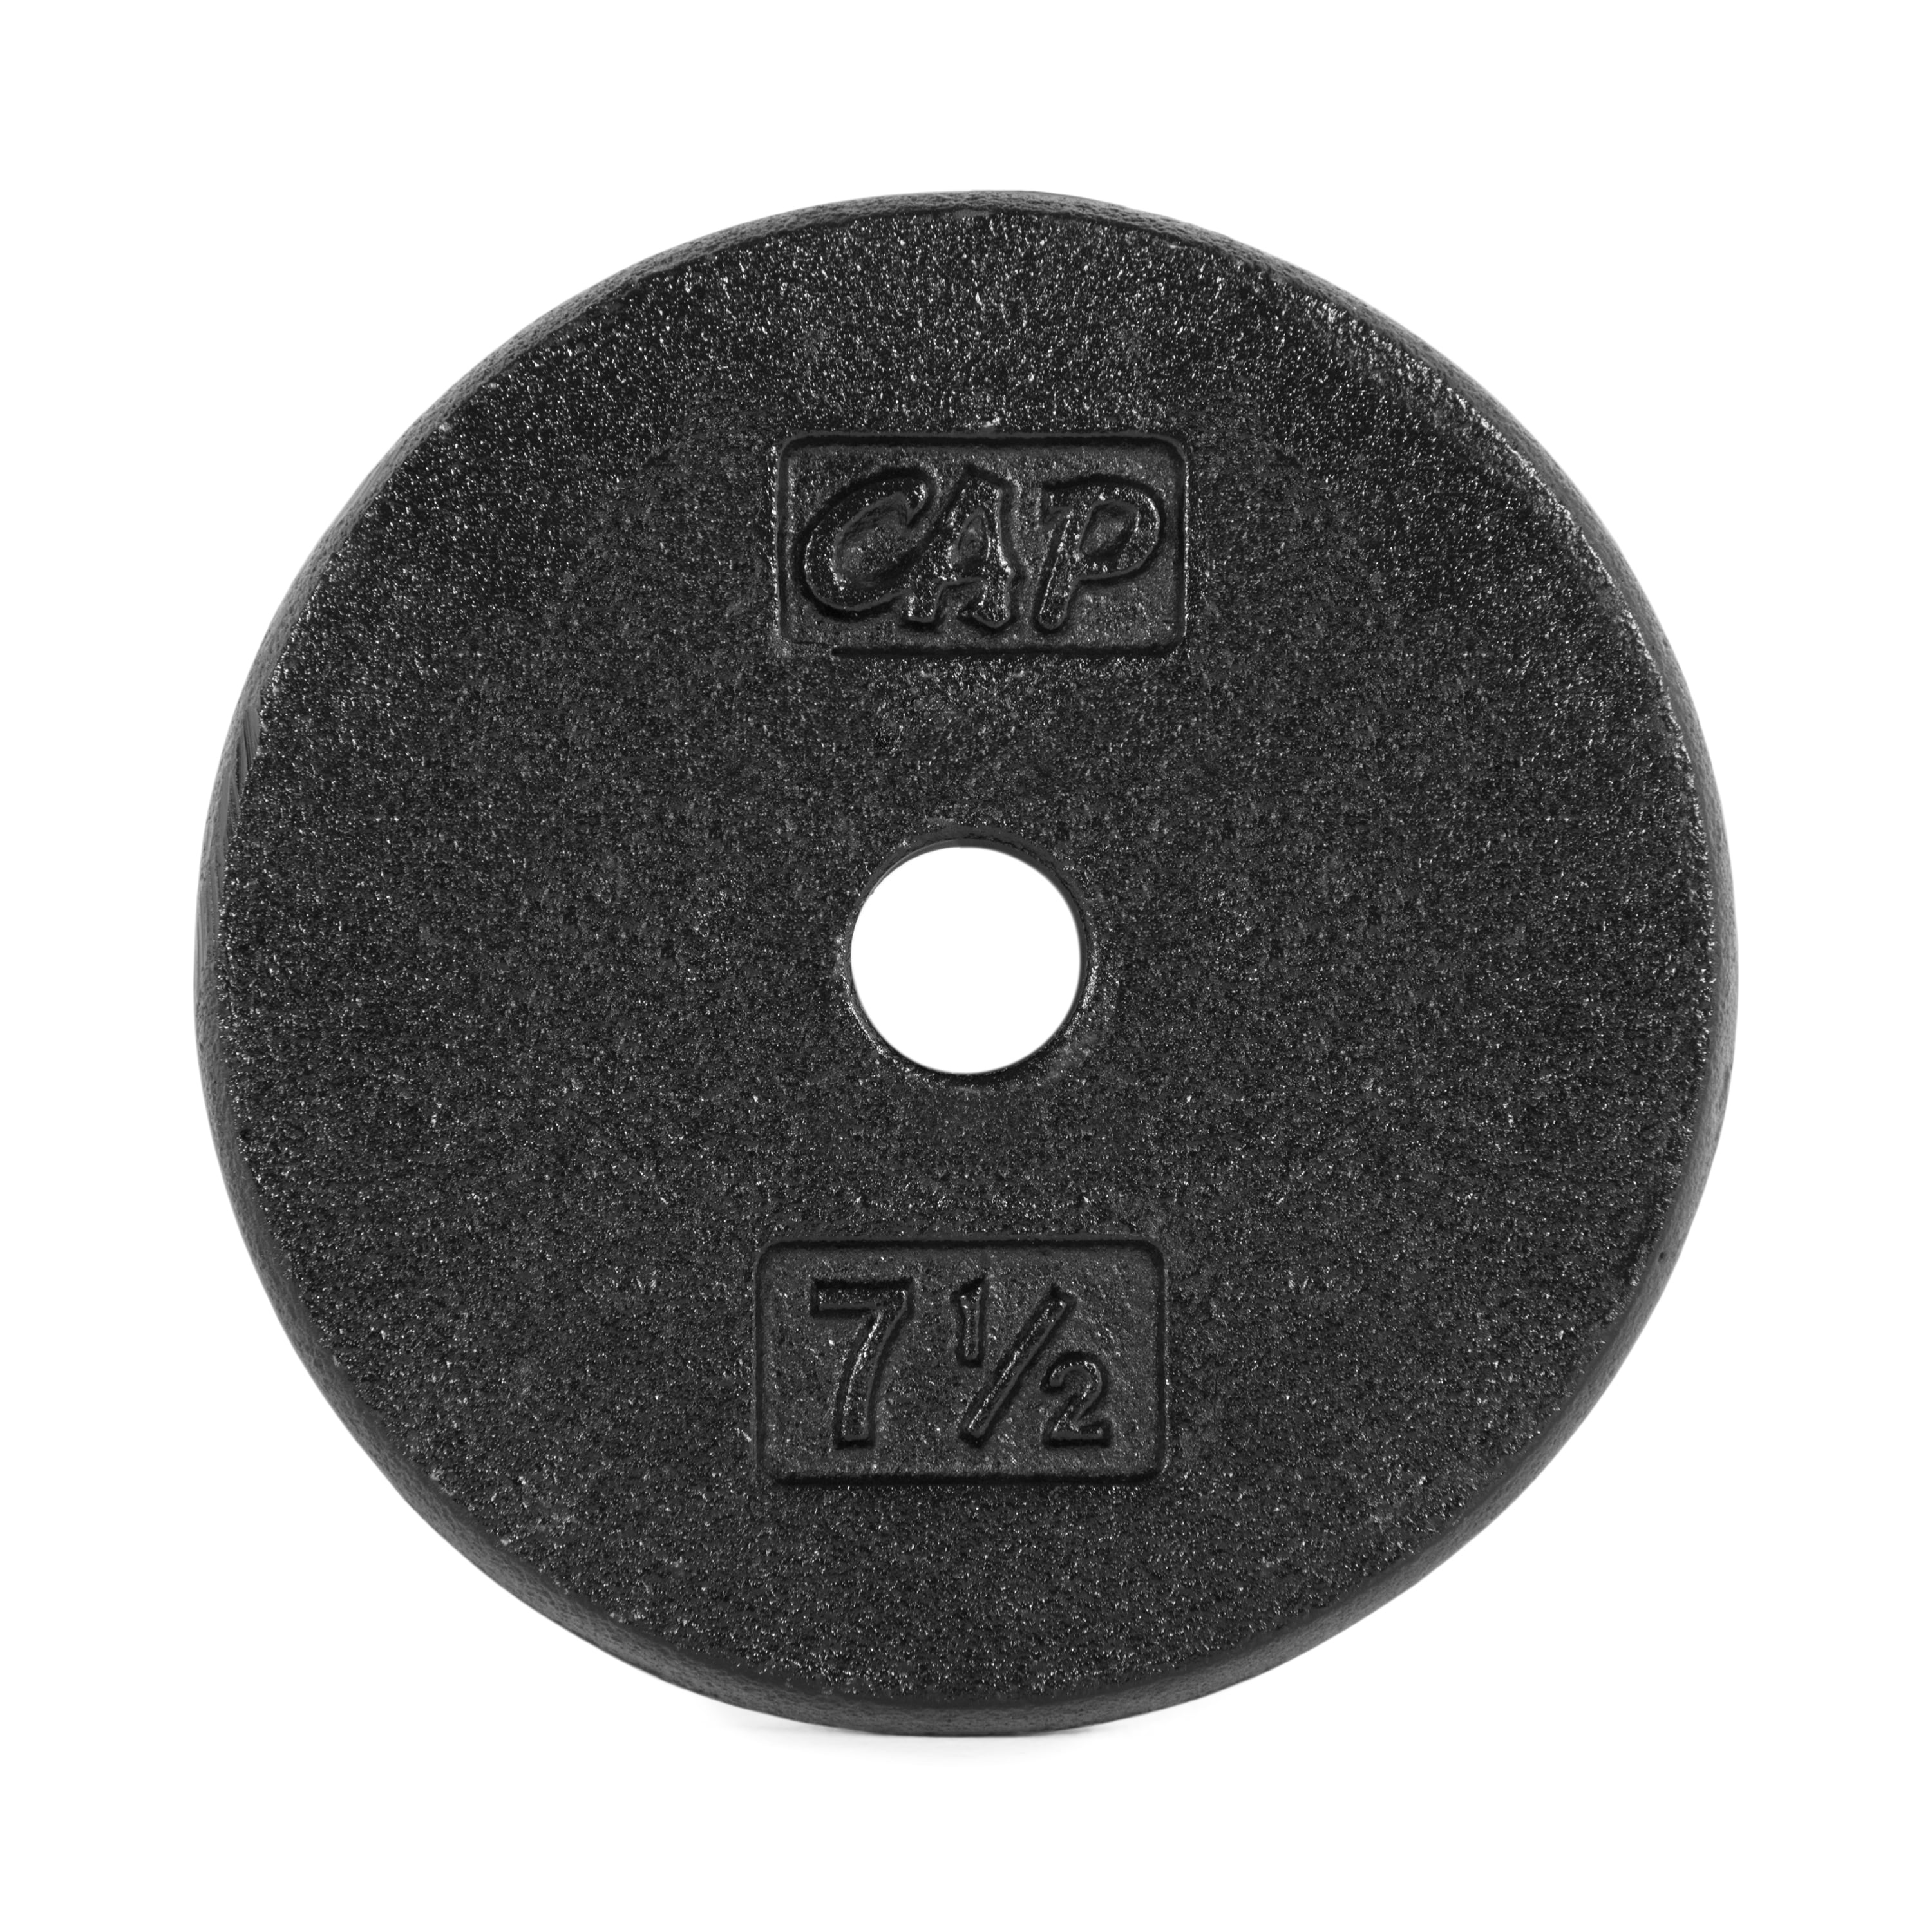 4 FAST SHIP 2.5 LB CAP Standard 1 Inch Barbell Weight Plates 10 LB Total 